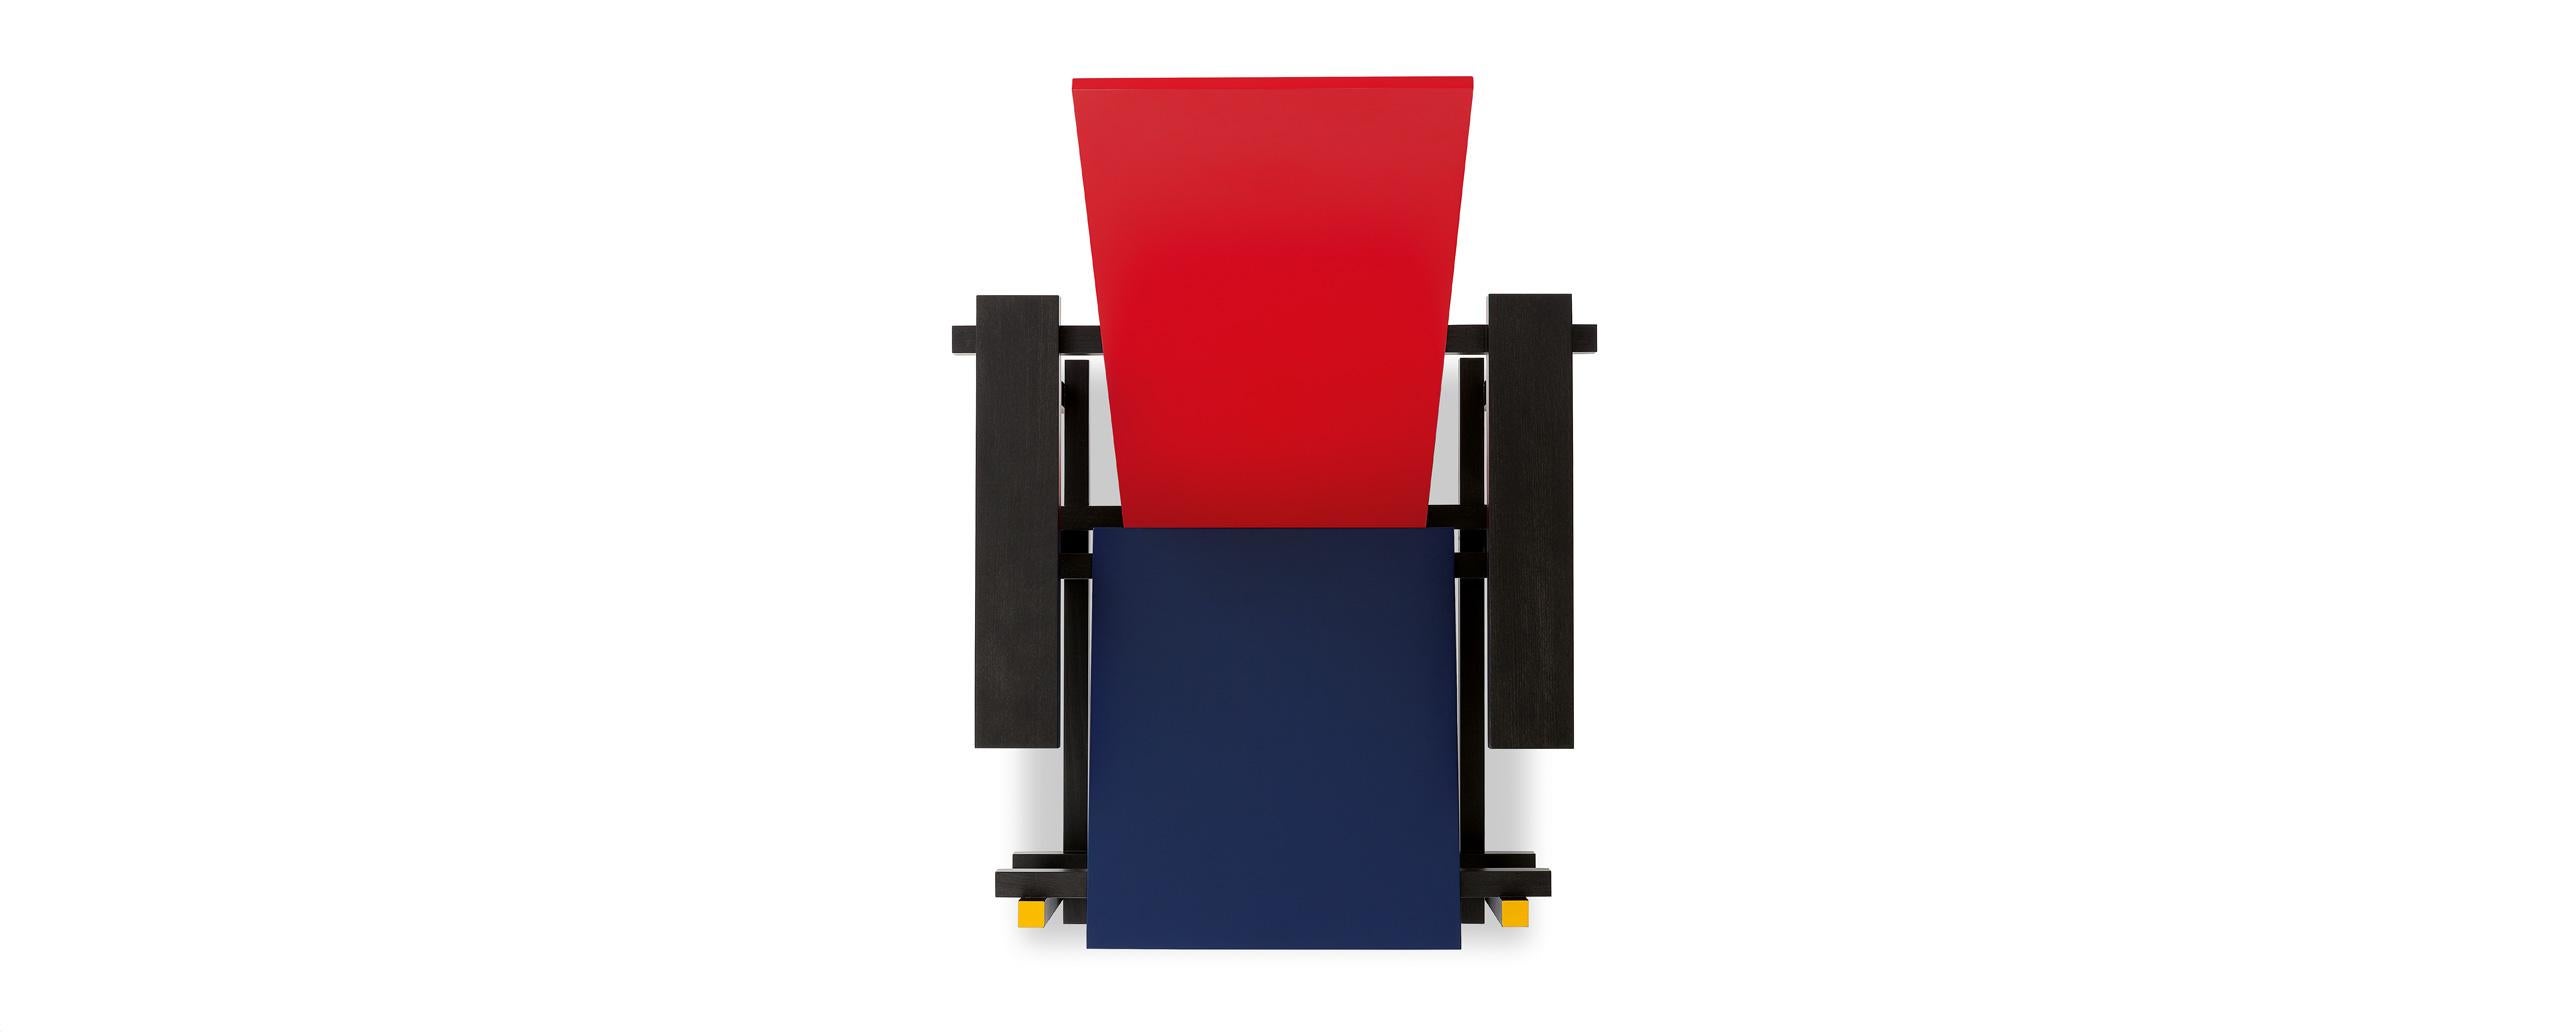 Chair designed by Gerrit Rietveld in 1918. Relaunched in 1973.
Manufactured by Cassina in Italy.

A sculptural seat with a pure and rationalist form, this chair became an authentic Manifesto for Neoplasticism, embraced by the Dutch De Stijl